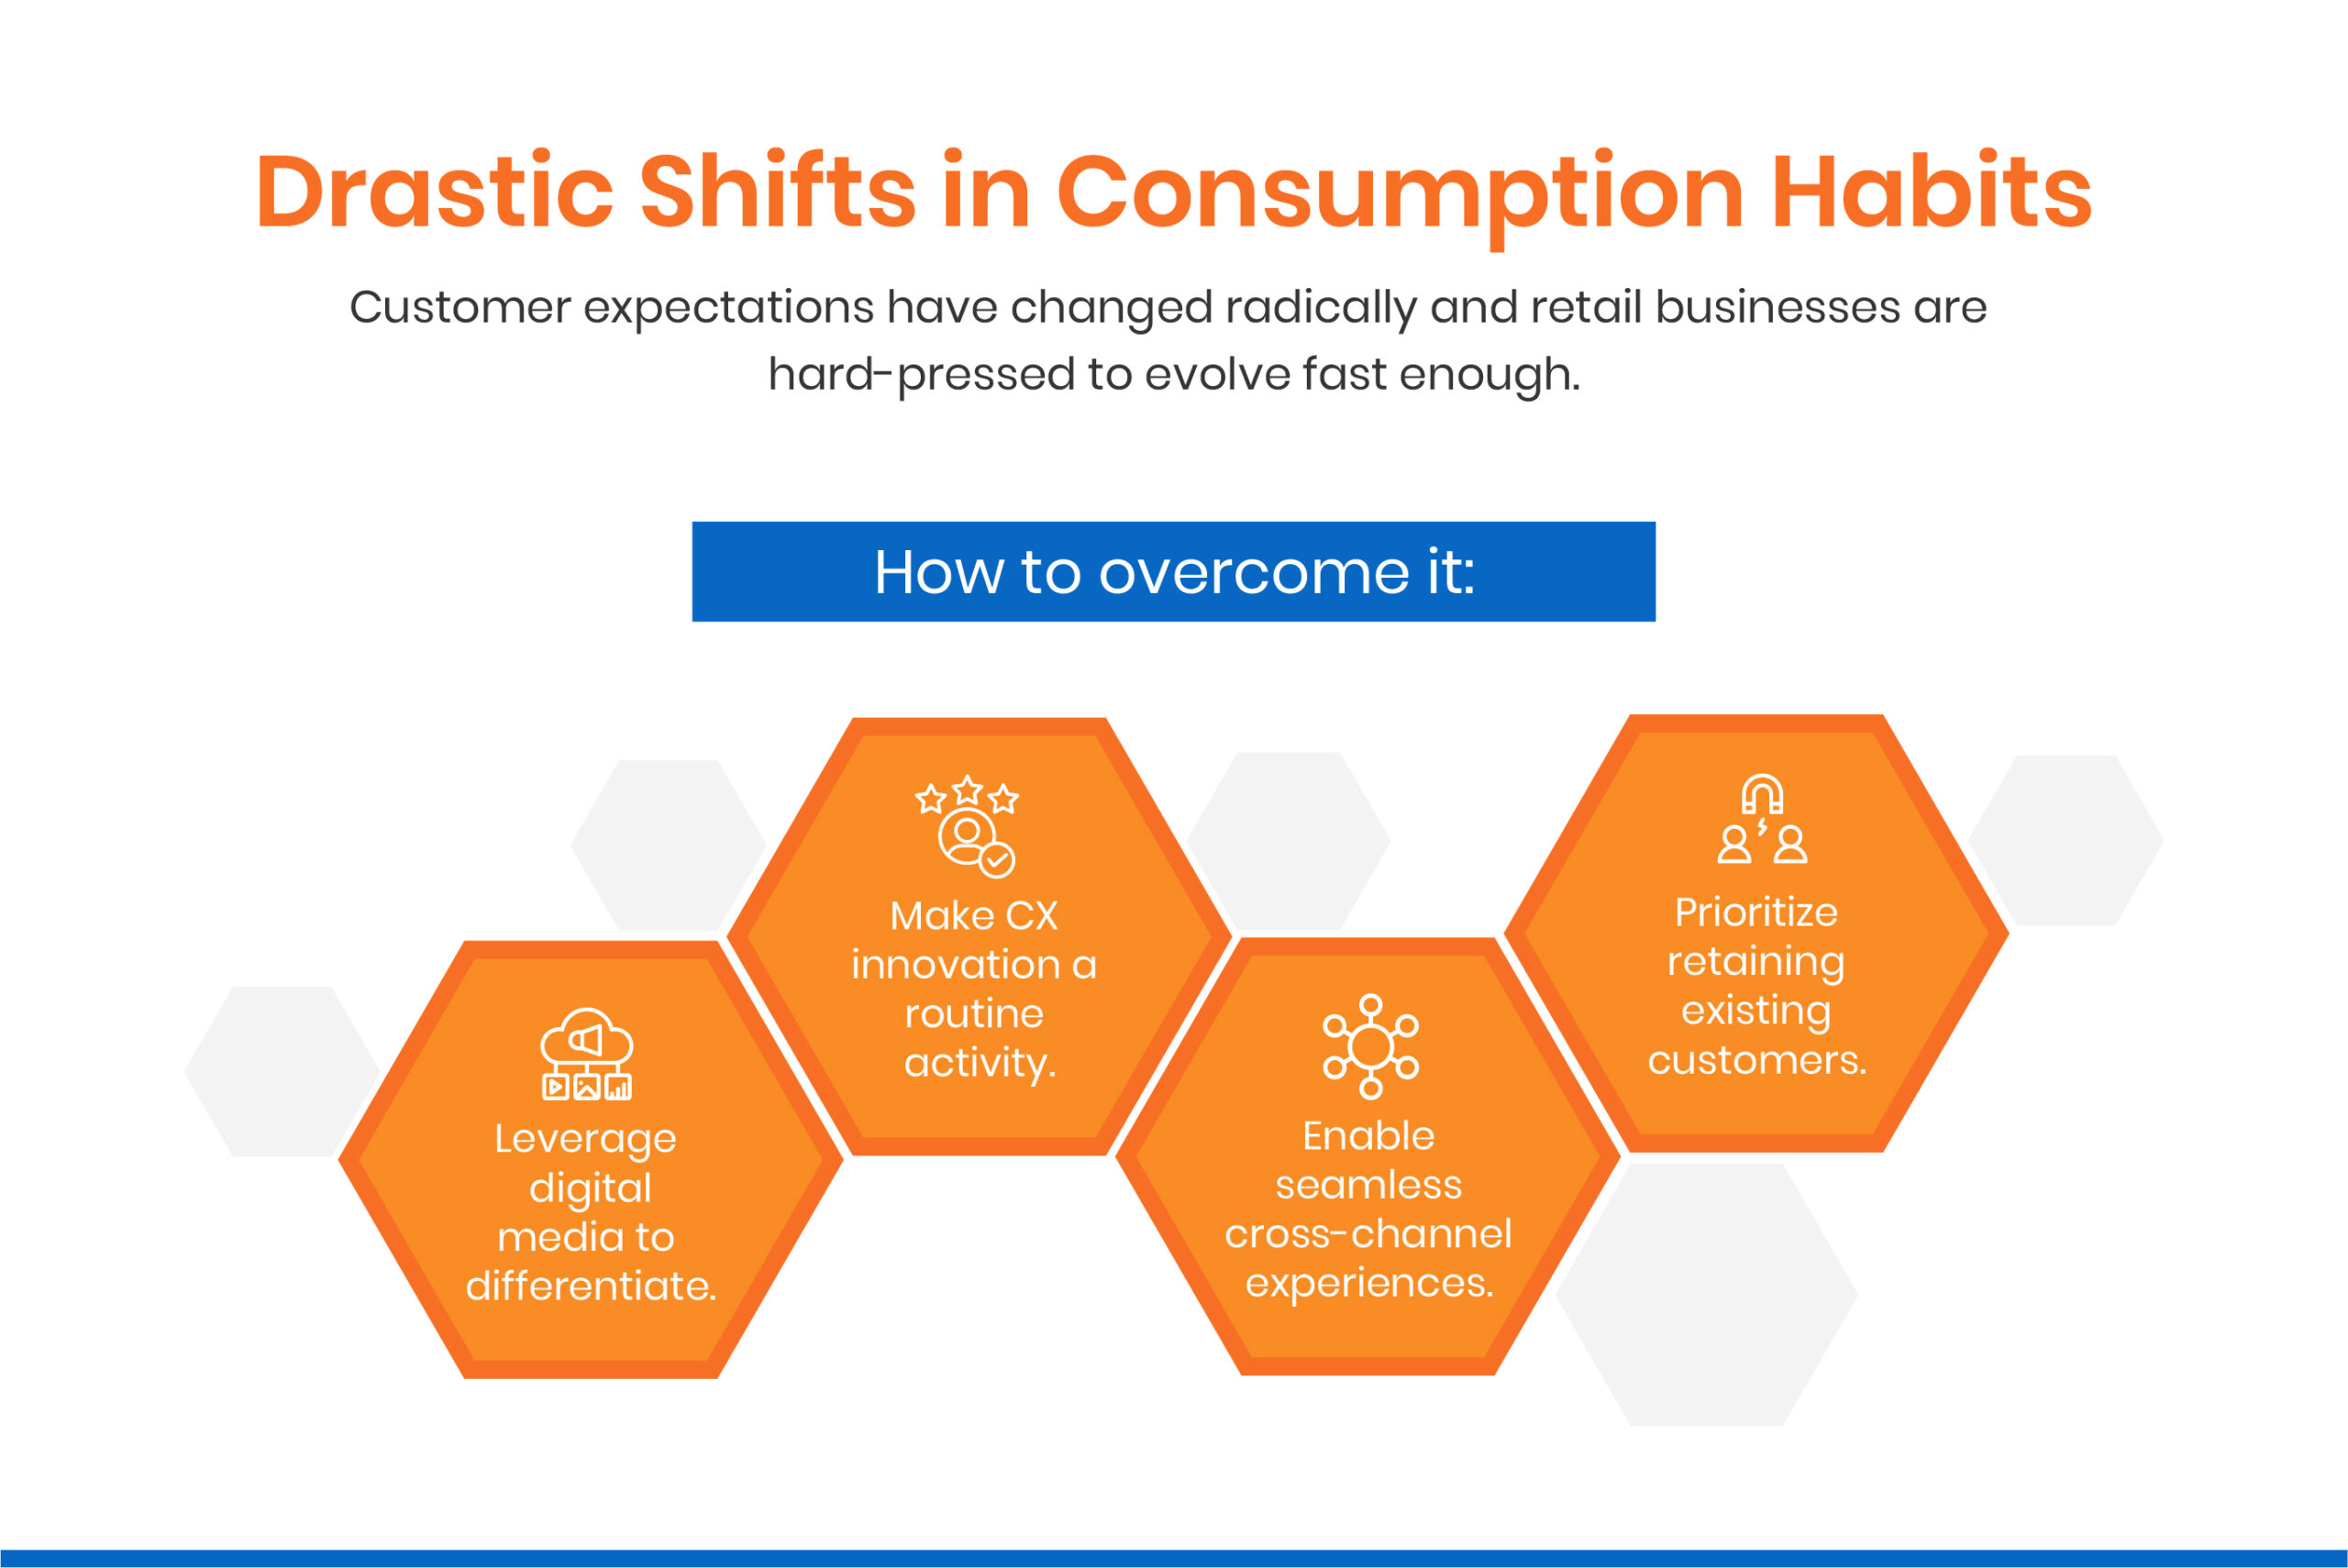 Challenge 1: Drastic Shifts in Consumption Habits